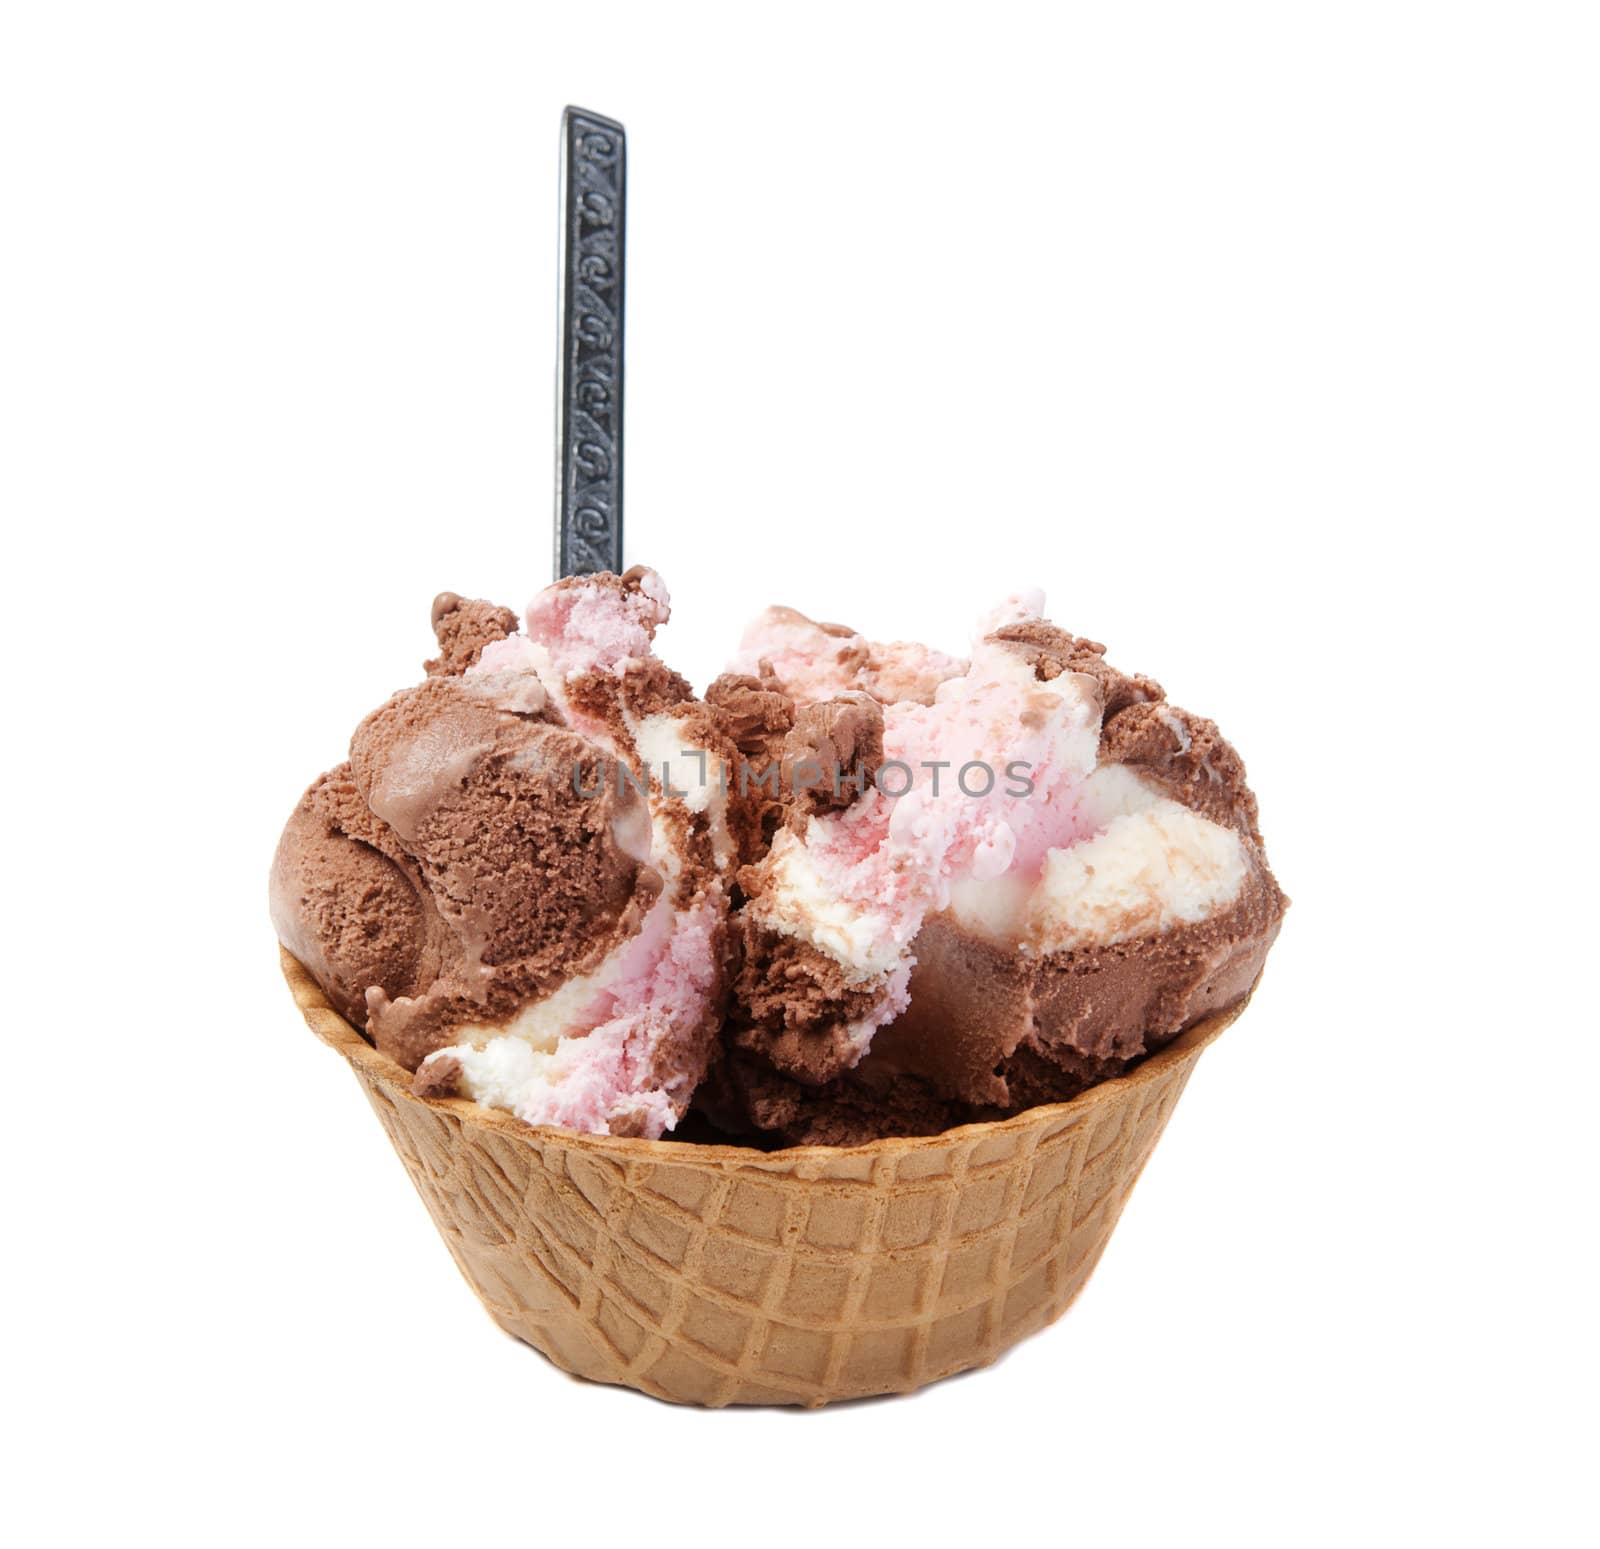 A wafer bowl of neapolitan ice cream, isolated against a white background.